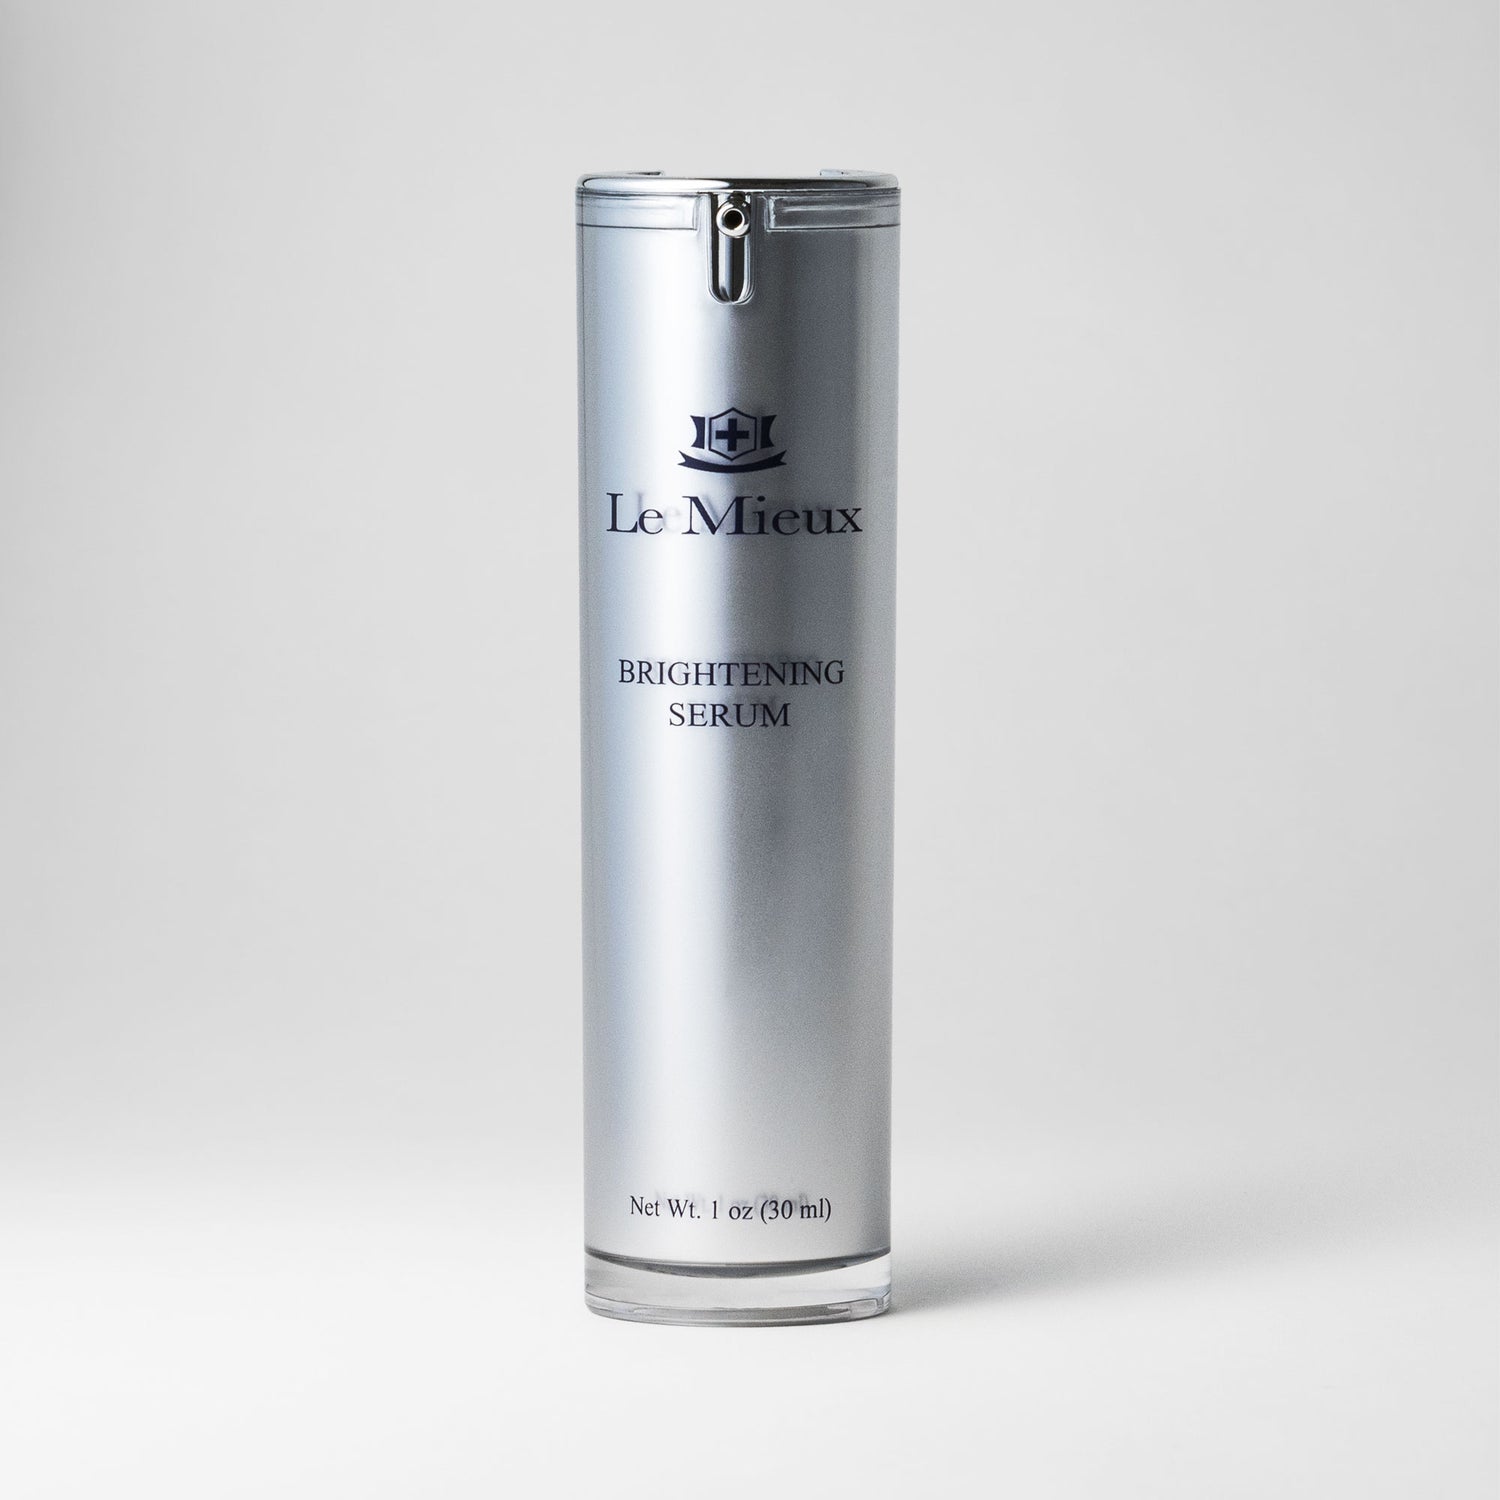  BRIGHTENING SERUM from Le Mieux Skincare - featured